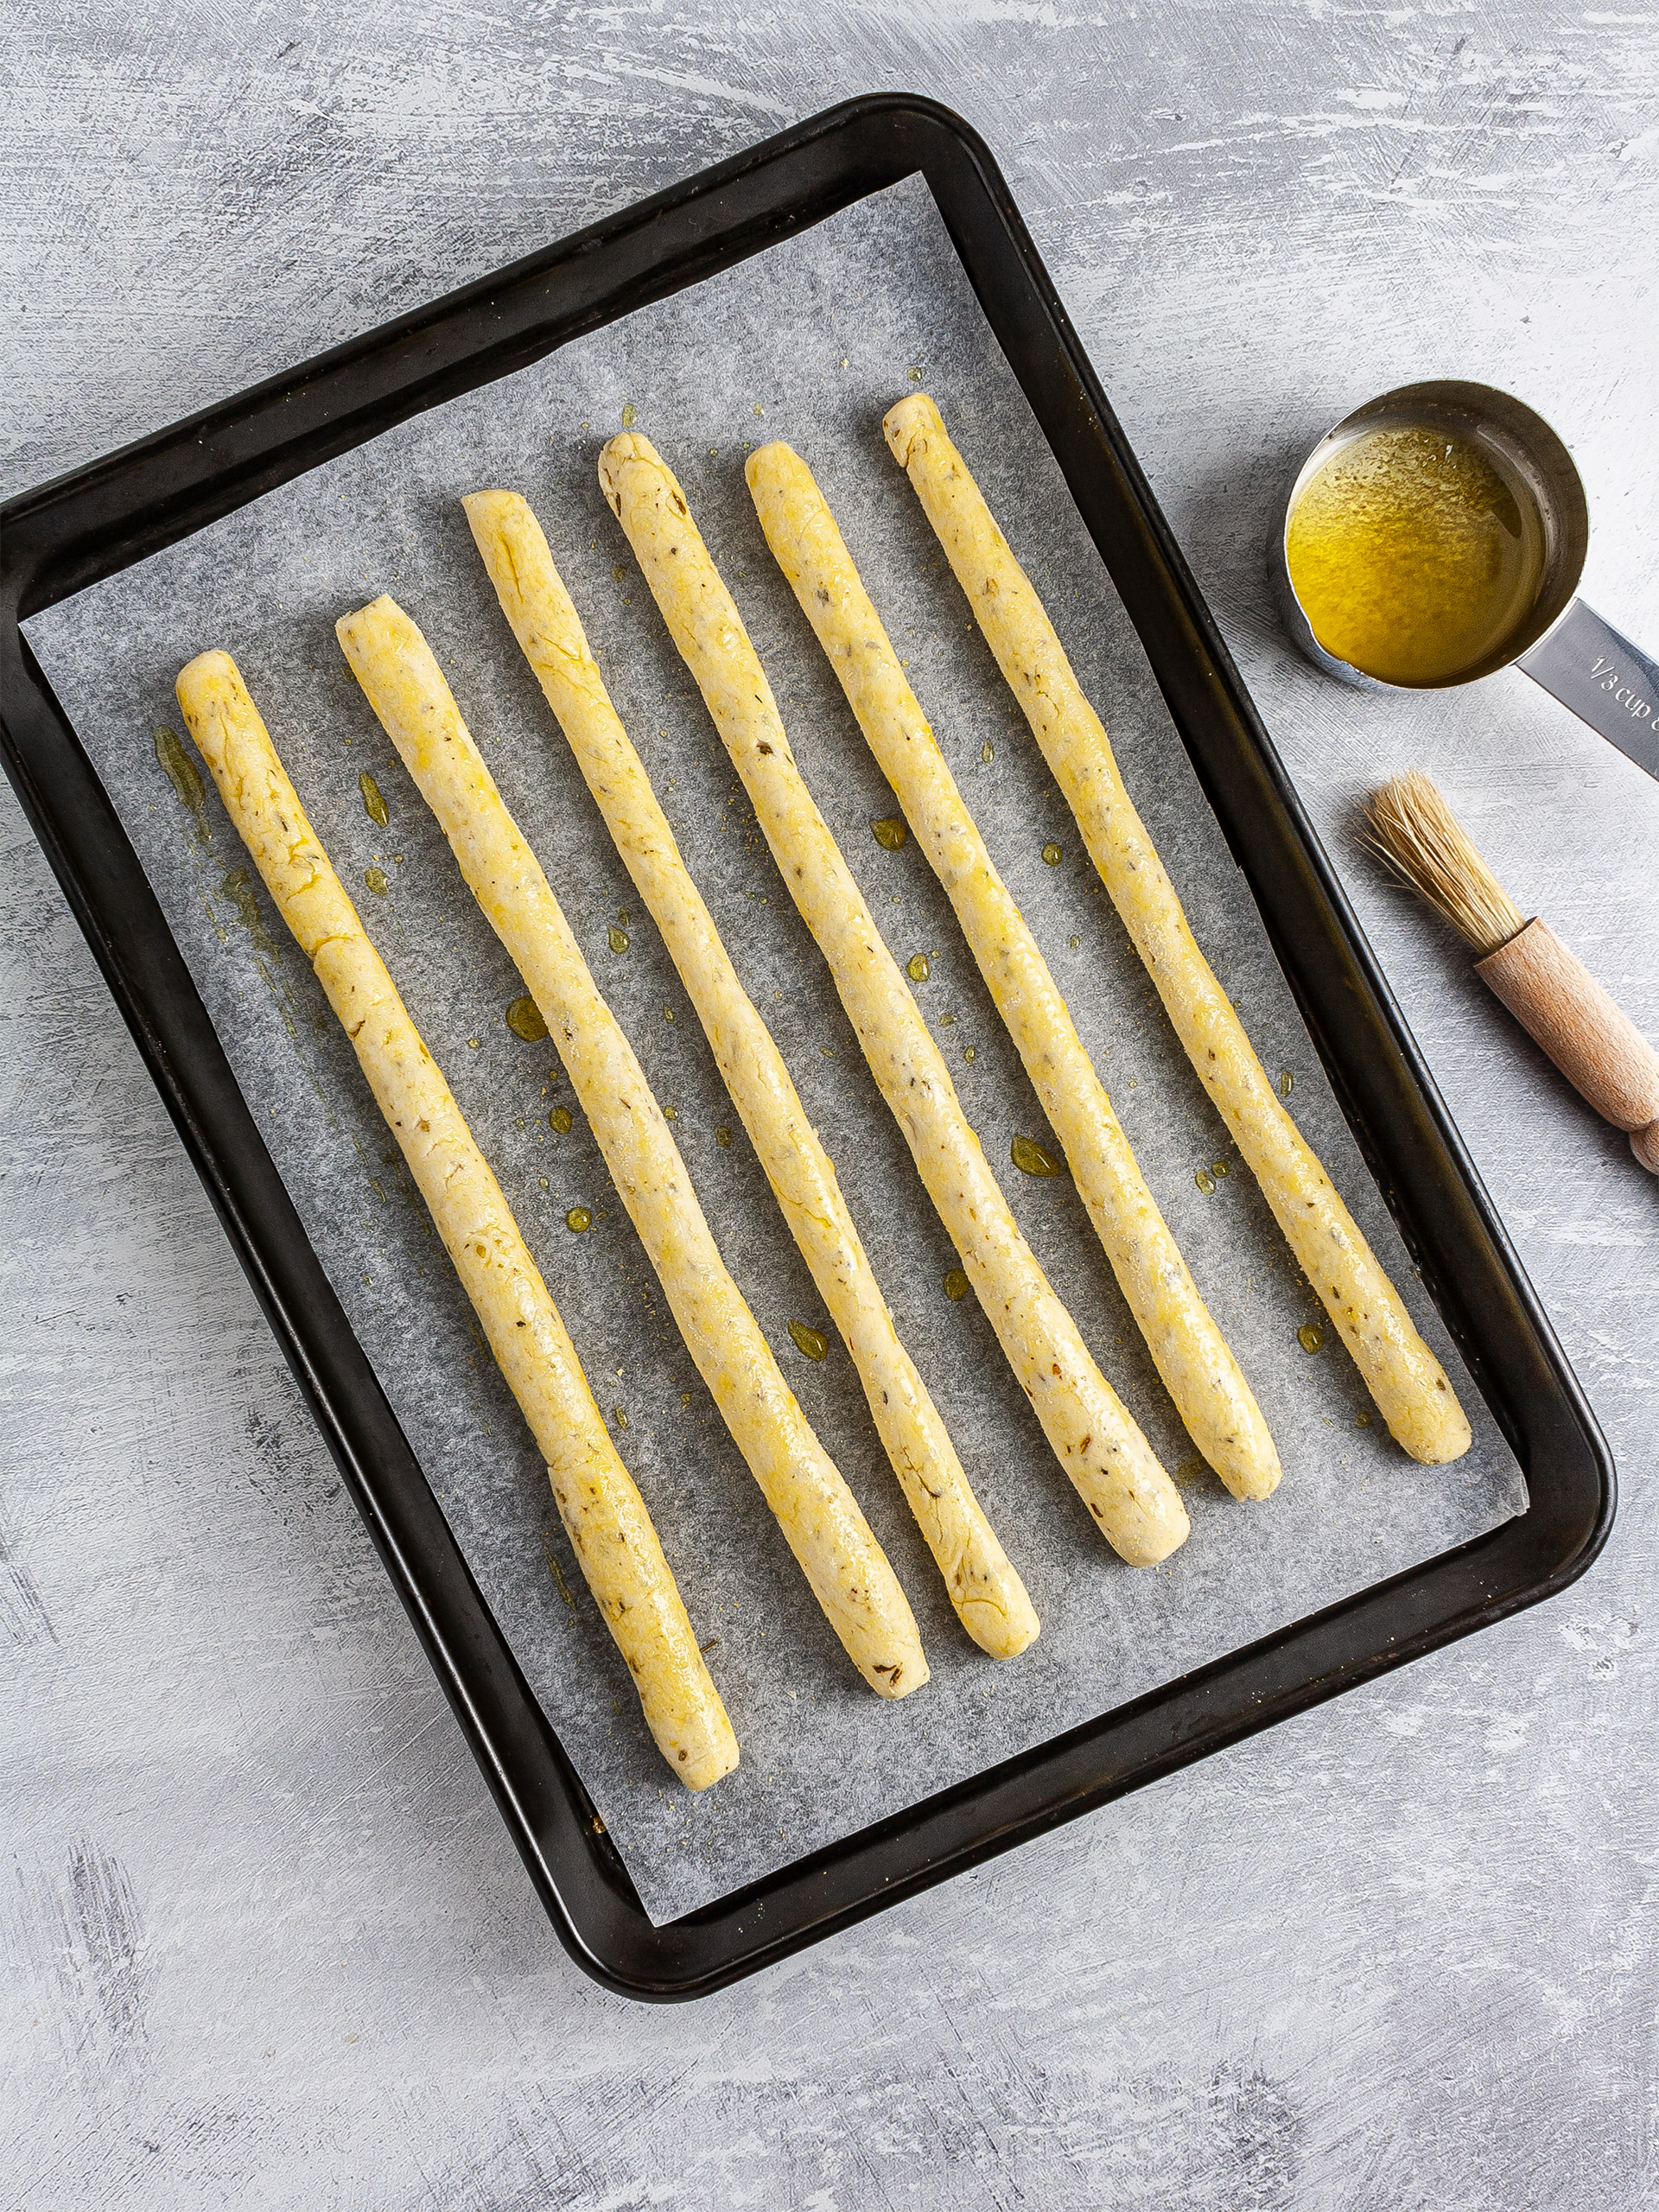 Proved breadsticks brushed with oil